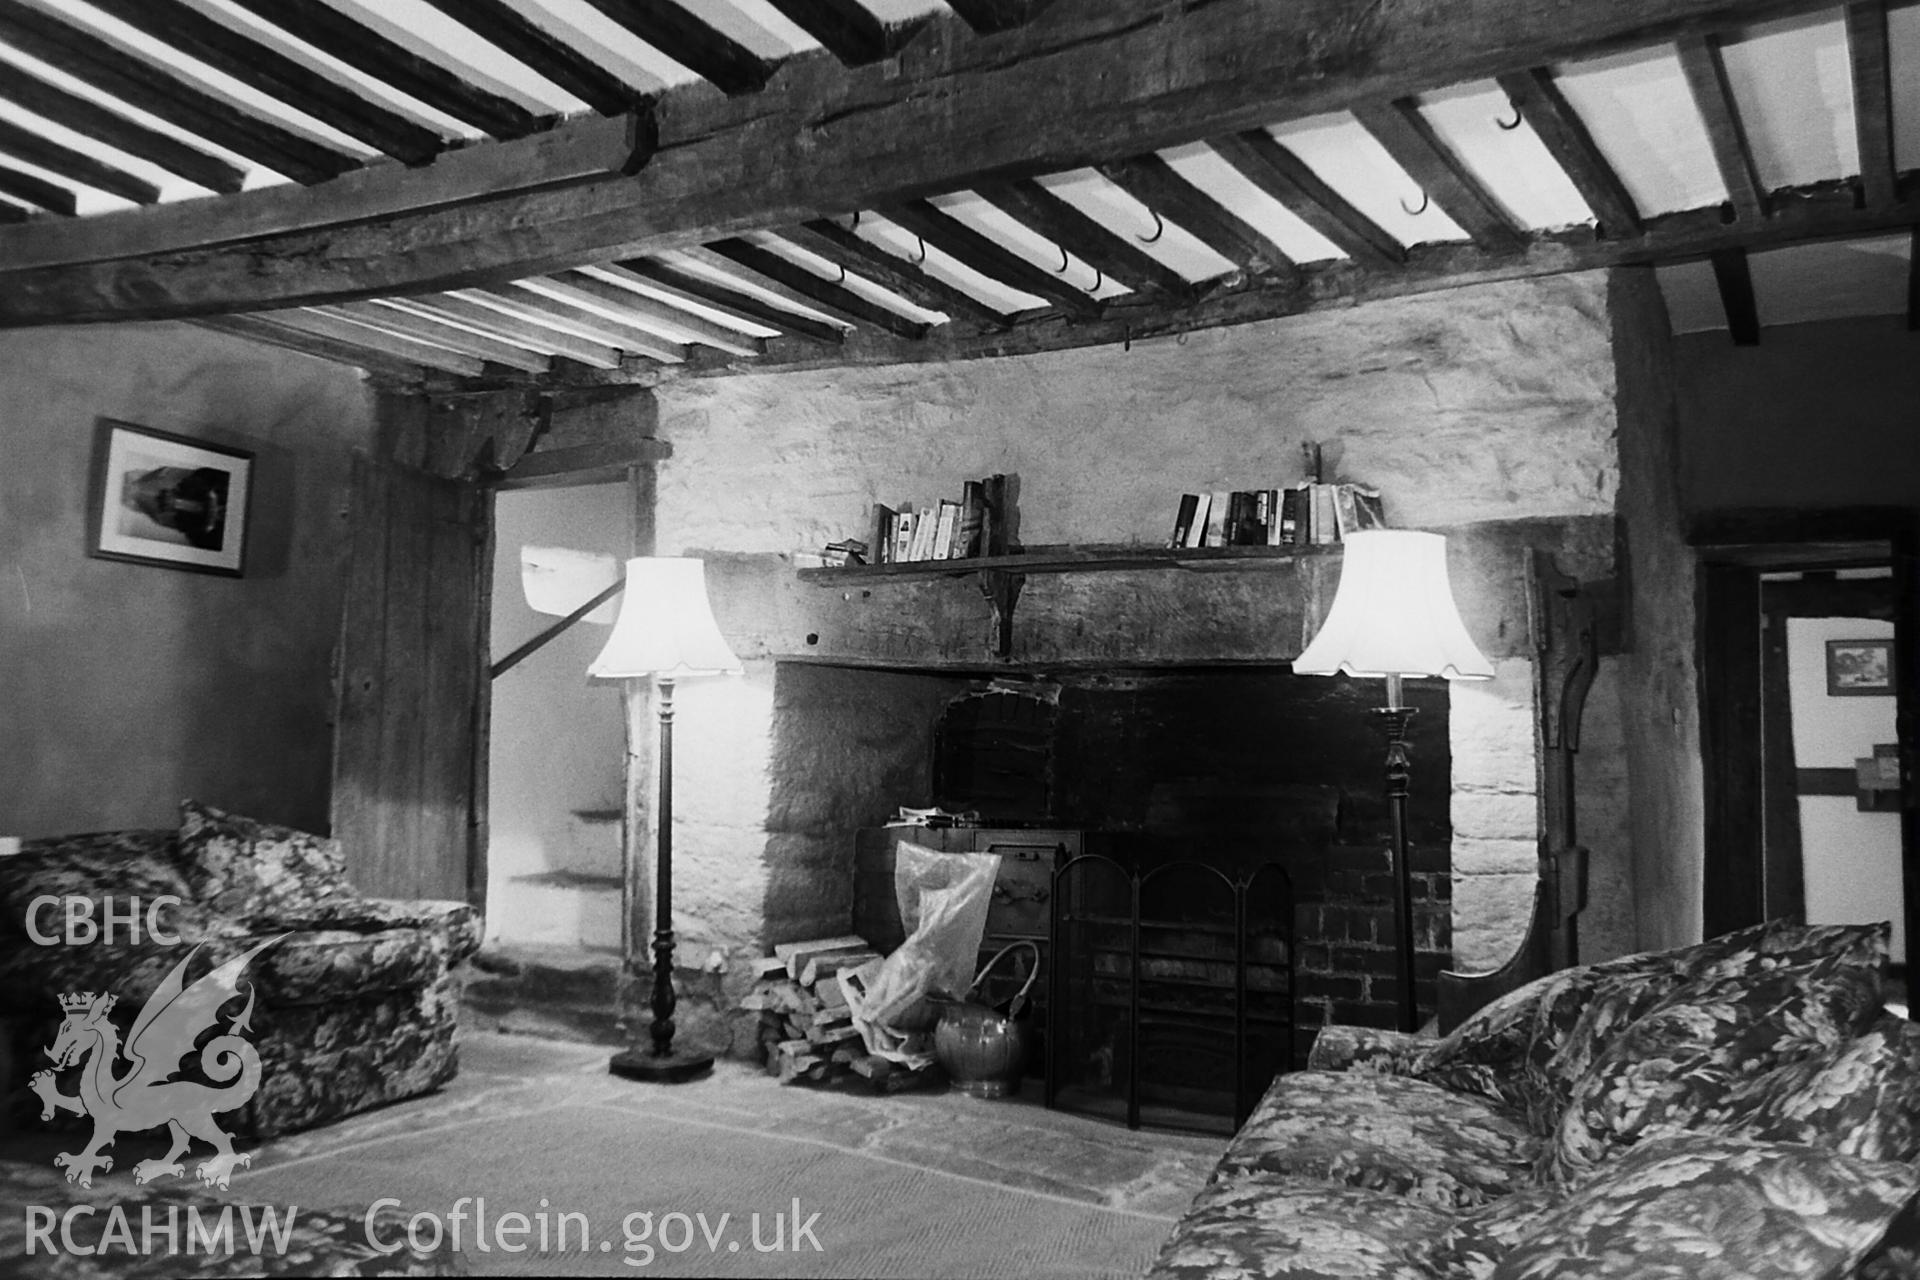 Black and white photo showing interior view of Llanerch y Cawr, taken by Paul R. Davis, 2000.